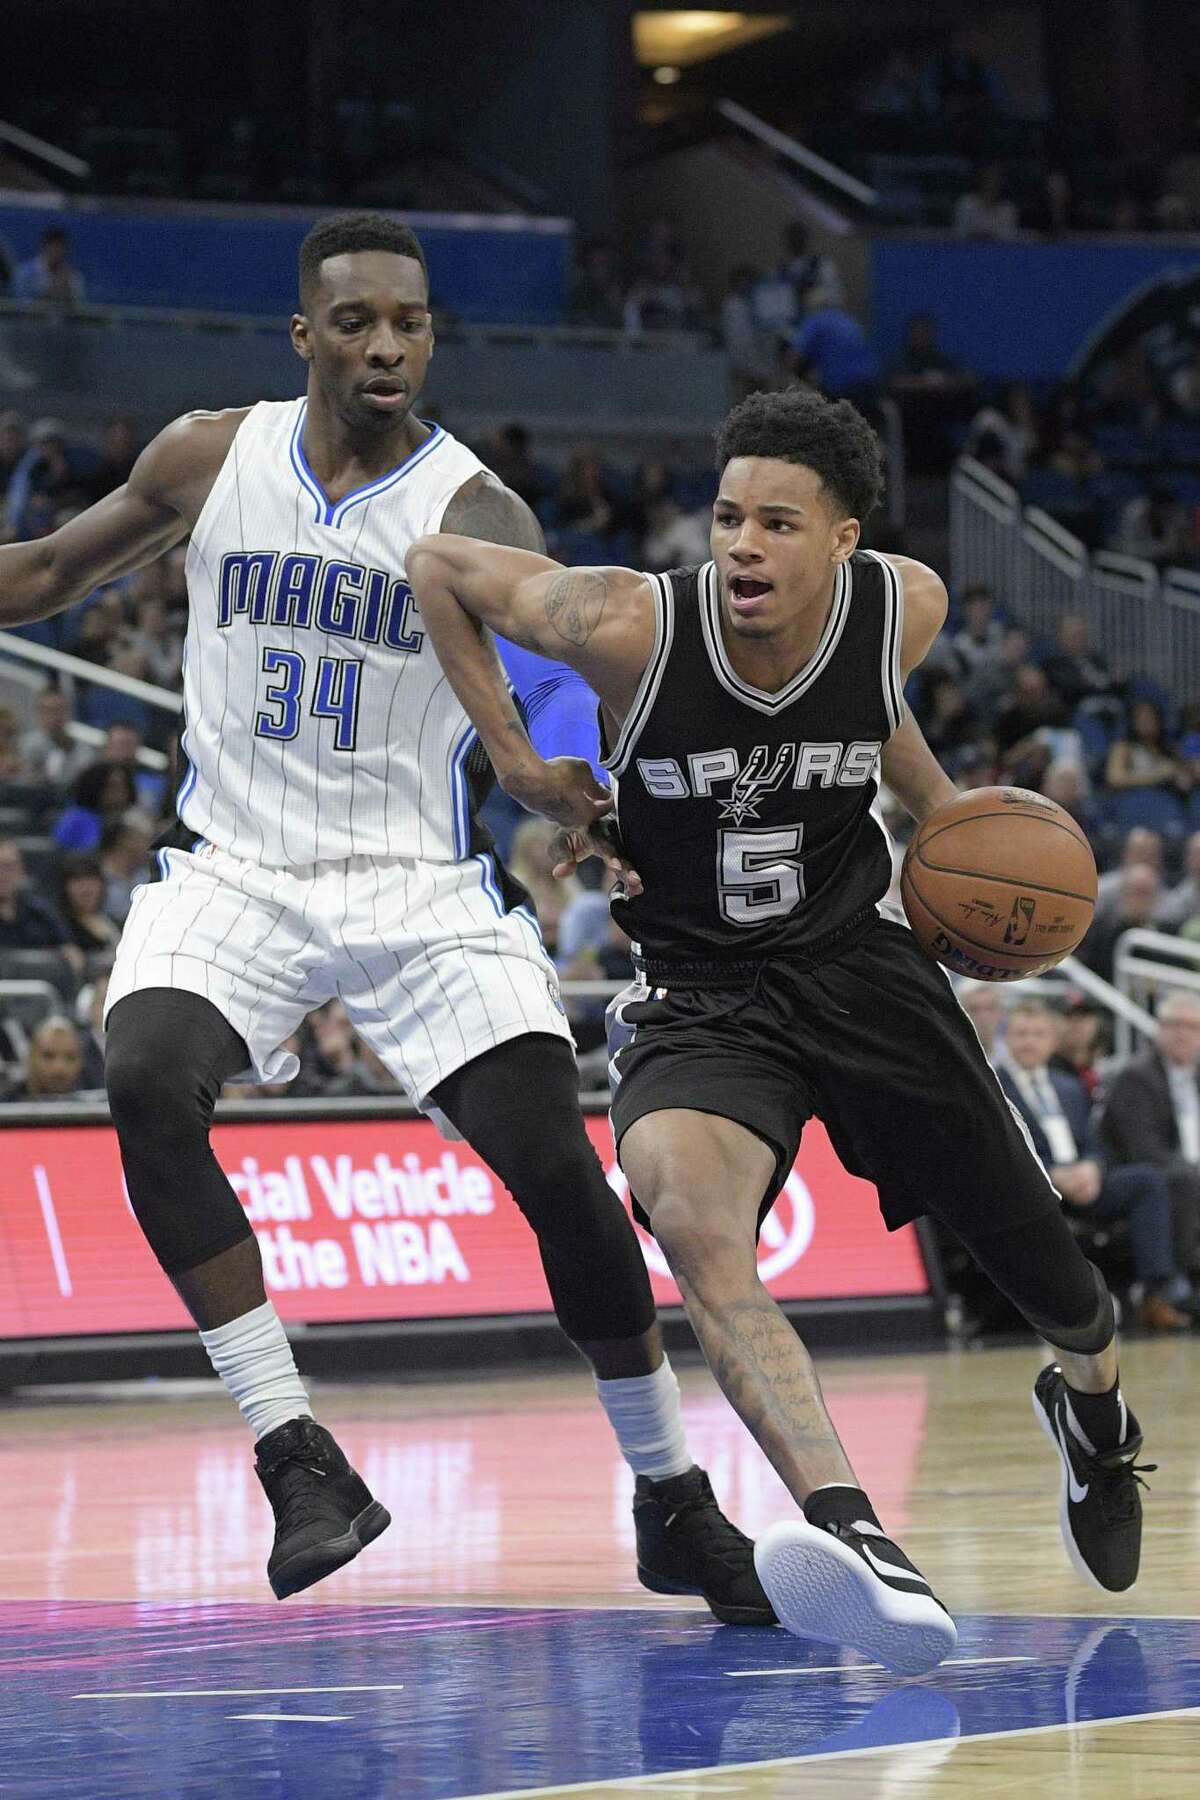 San Antonio Spurs guard Dejounte Murray (5) drives to the basket in front of Orlando Magic forward Jeff Green (34) during the second half of an NBA basketball game in Orlando, Fla., Wednesday, Feb. 15, 2017. The Spurs won 107-79. (AP Photo/Phelan M. Ebenhack)